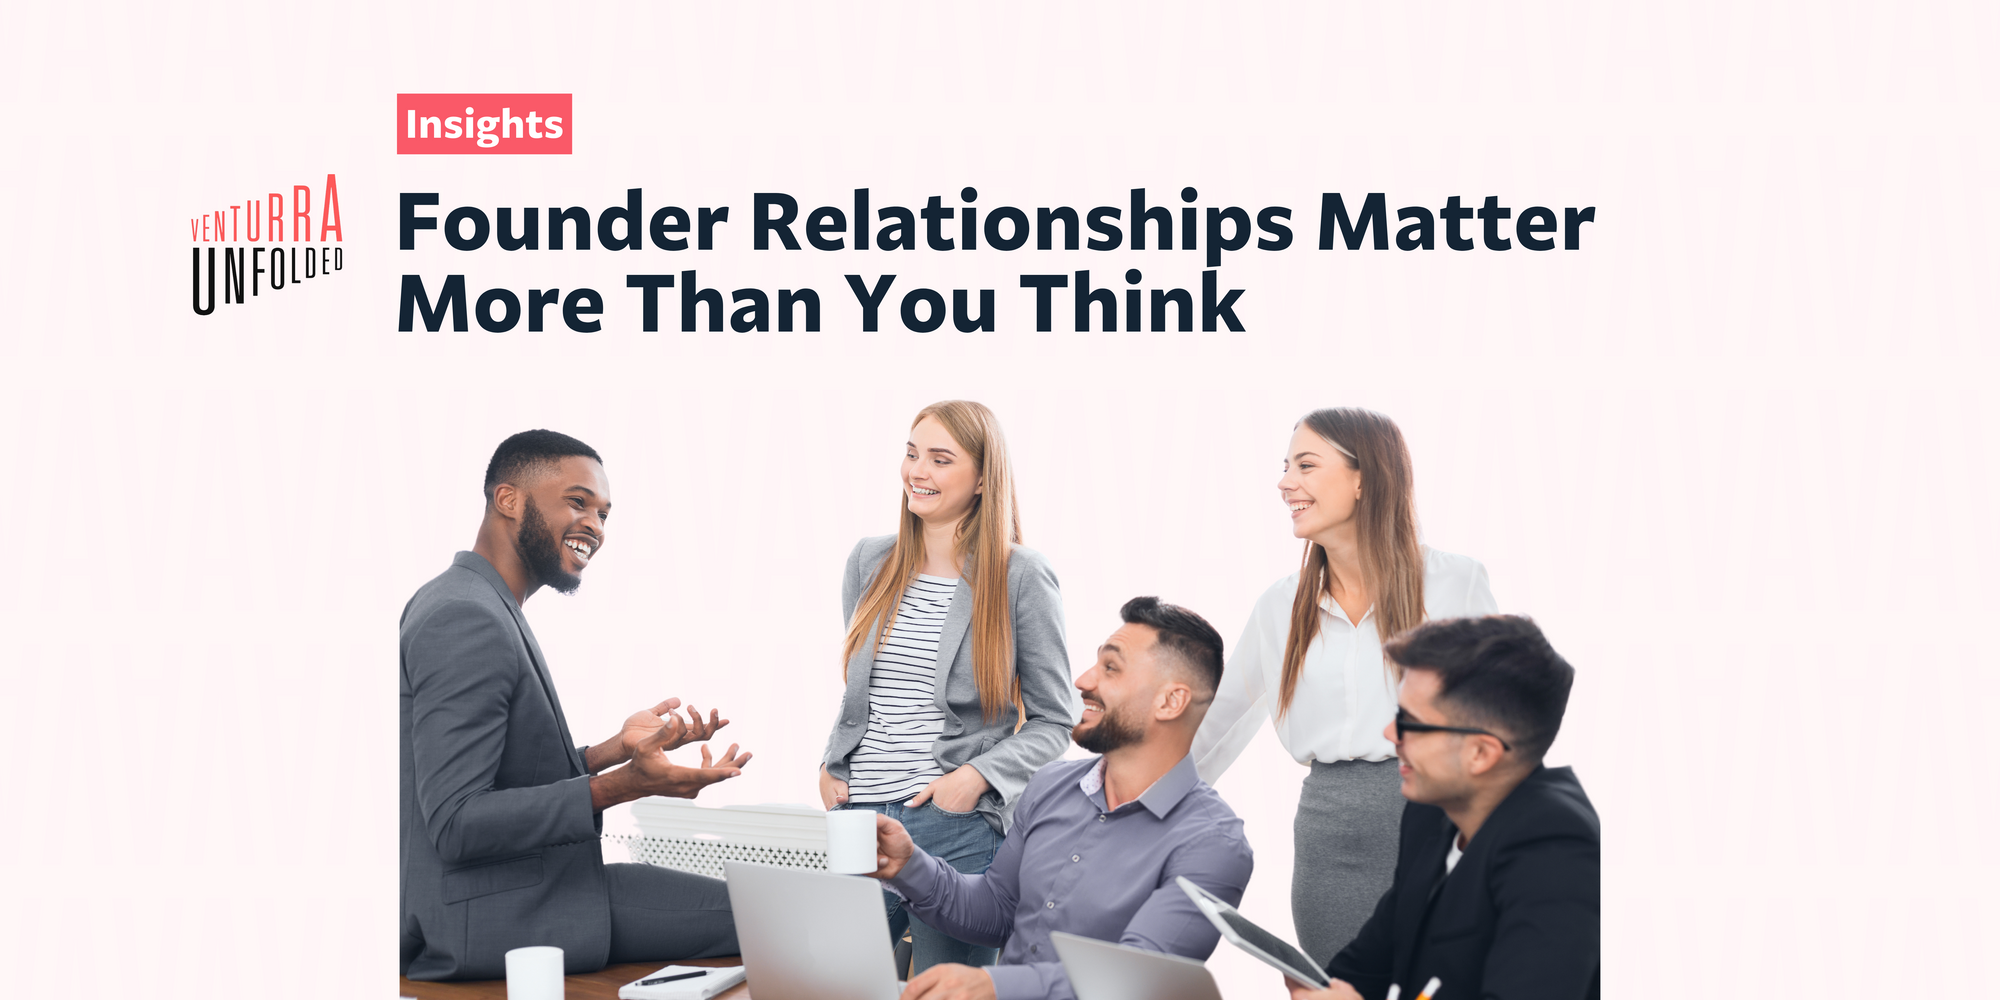 Here's How Founder Relationships Matter More Than You Think